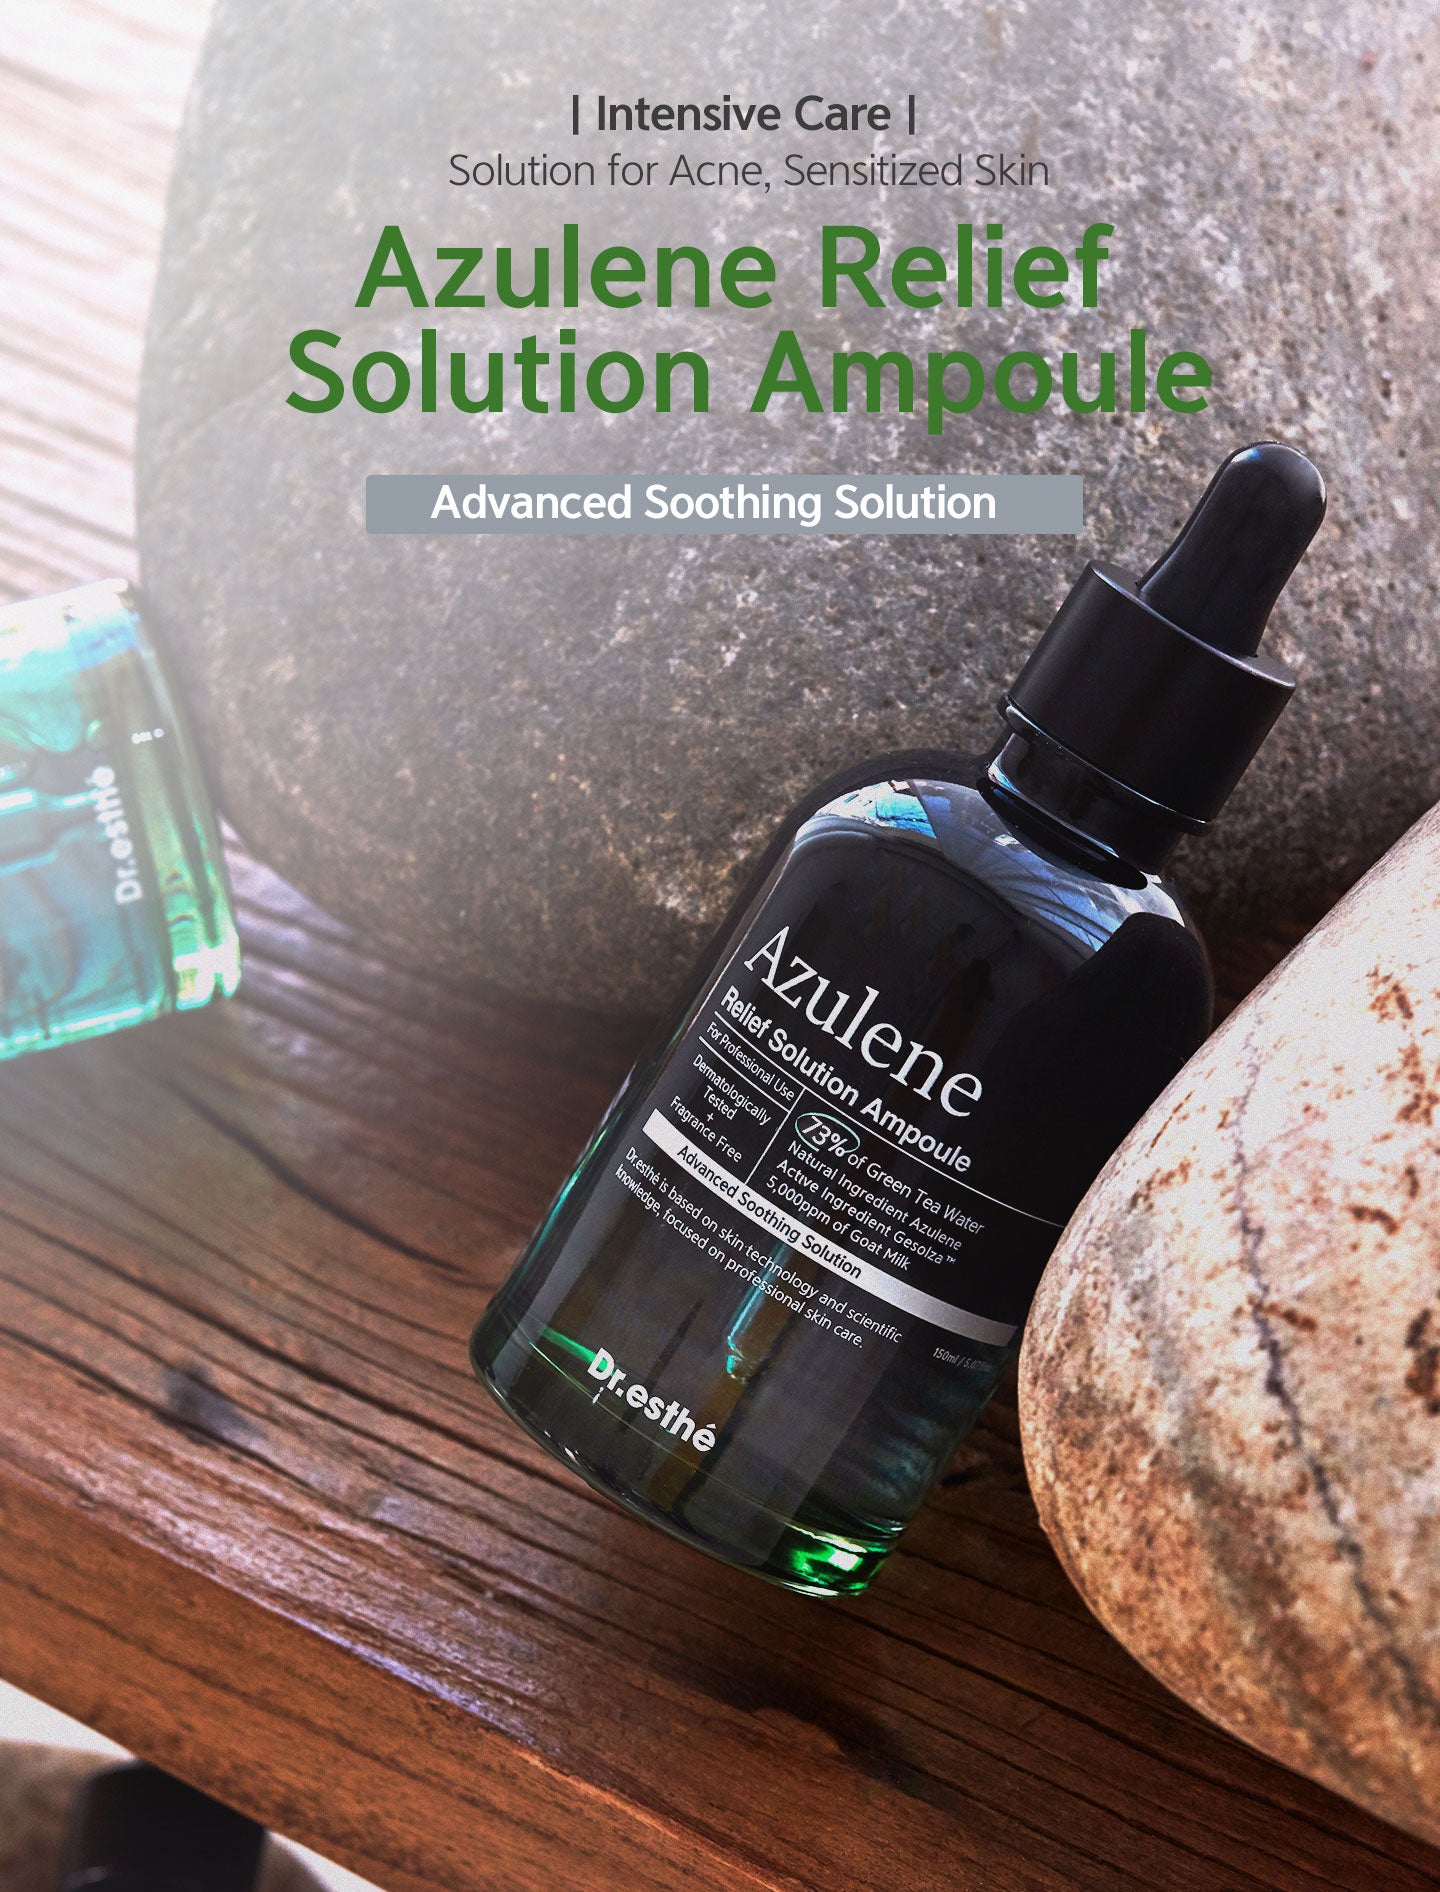 Intensive care, solution for acne, sensitized skin. Azulene relief solution ampoule 50ml. 